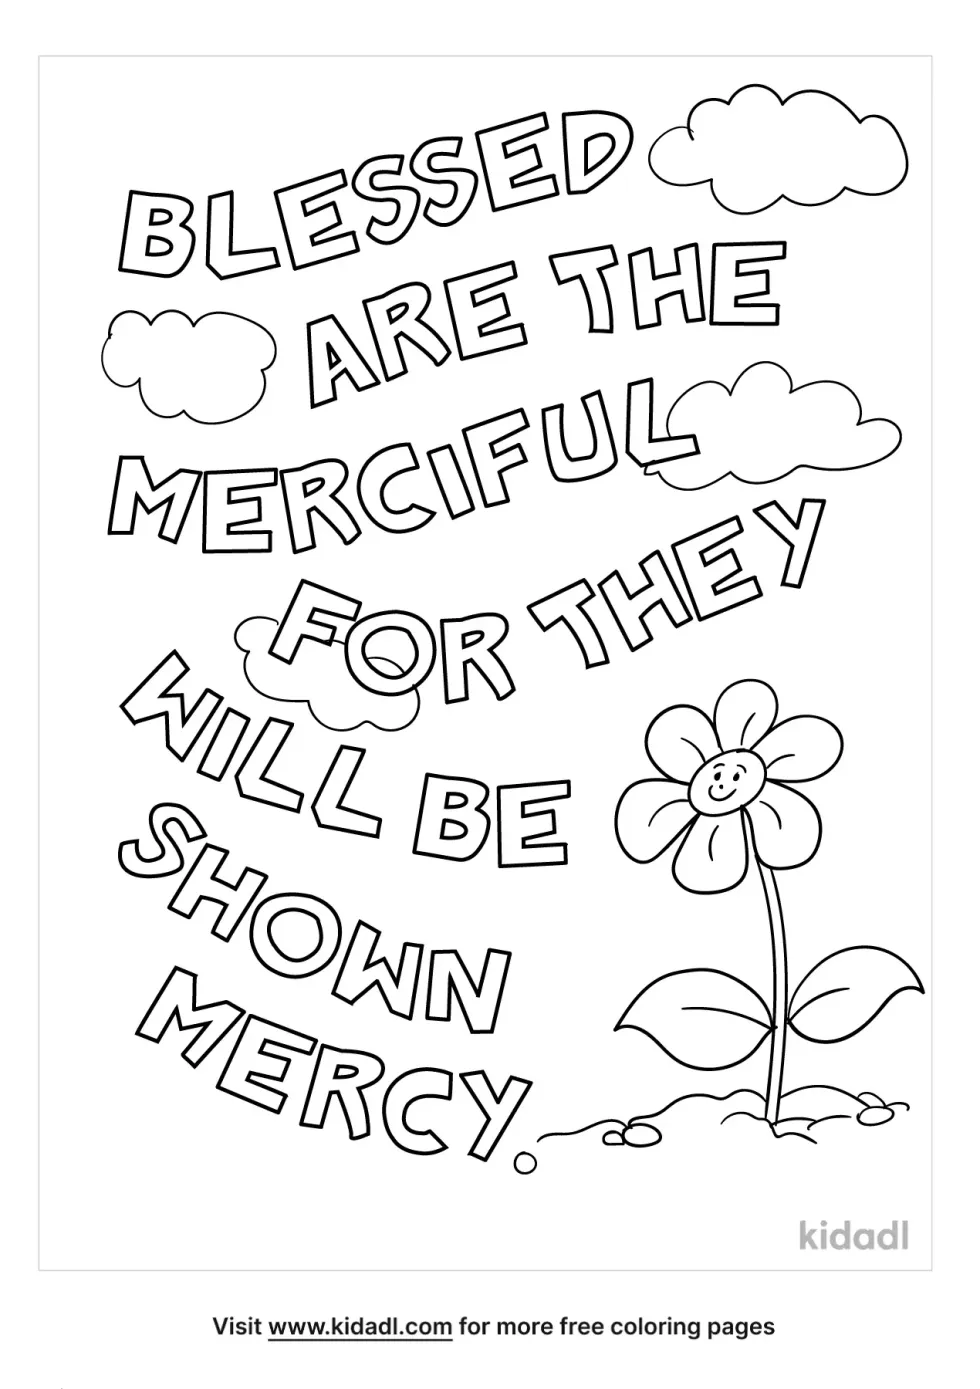 Blessed Are The Merciful